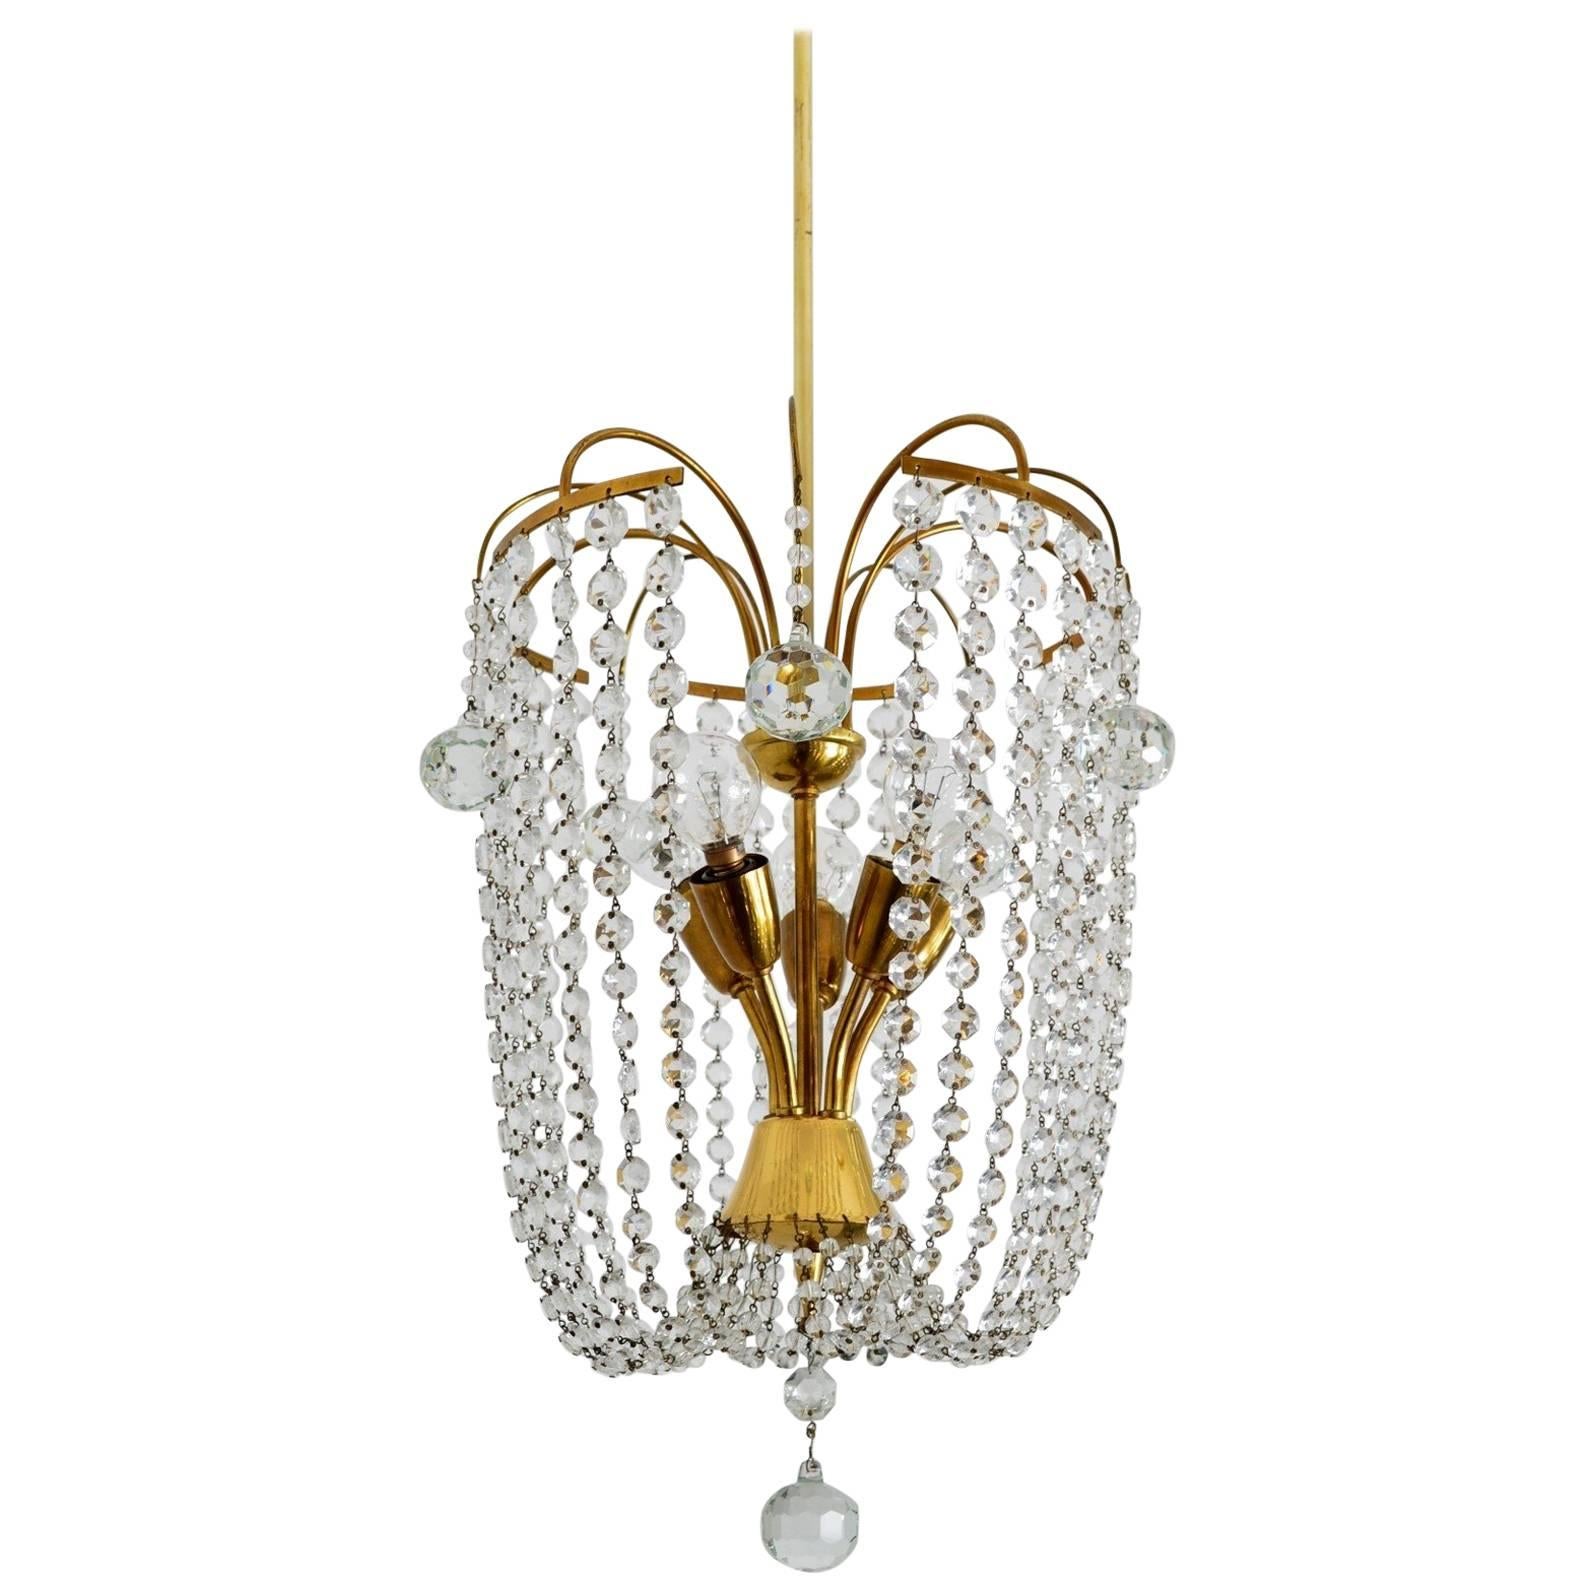 Austrian Midcentury Crystal Glass and Brass Chandelier, 1950s